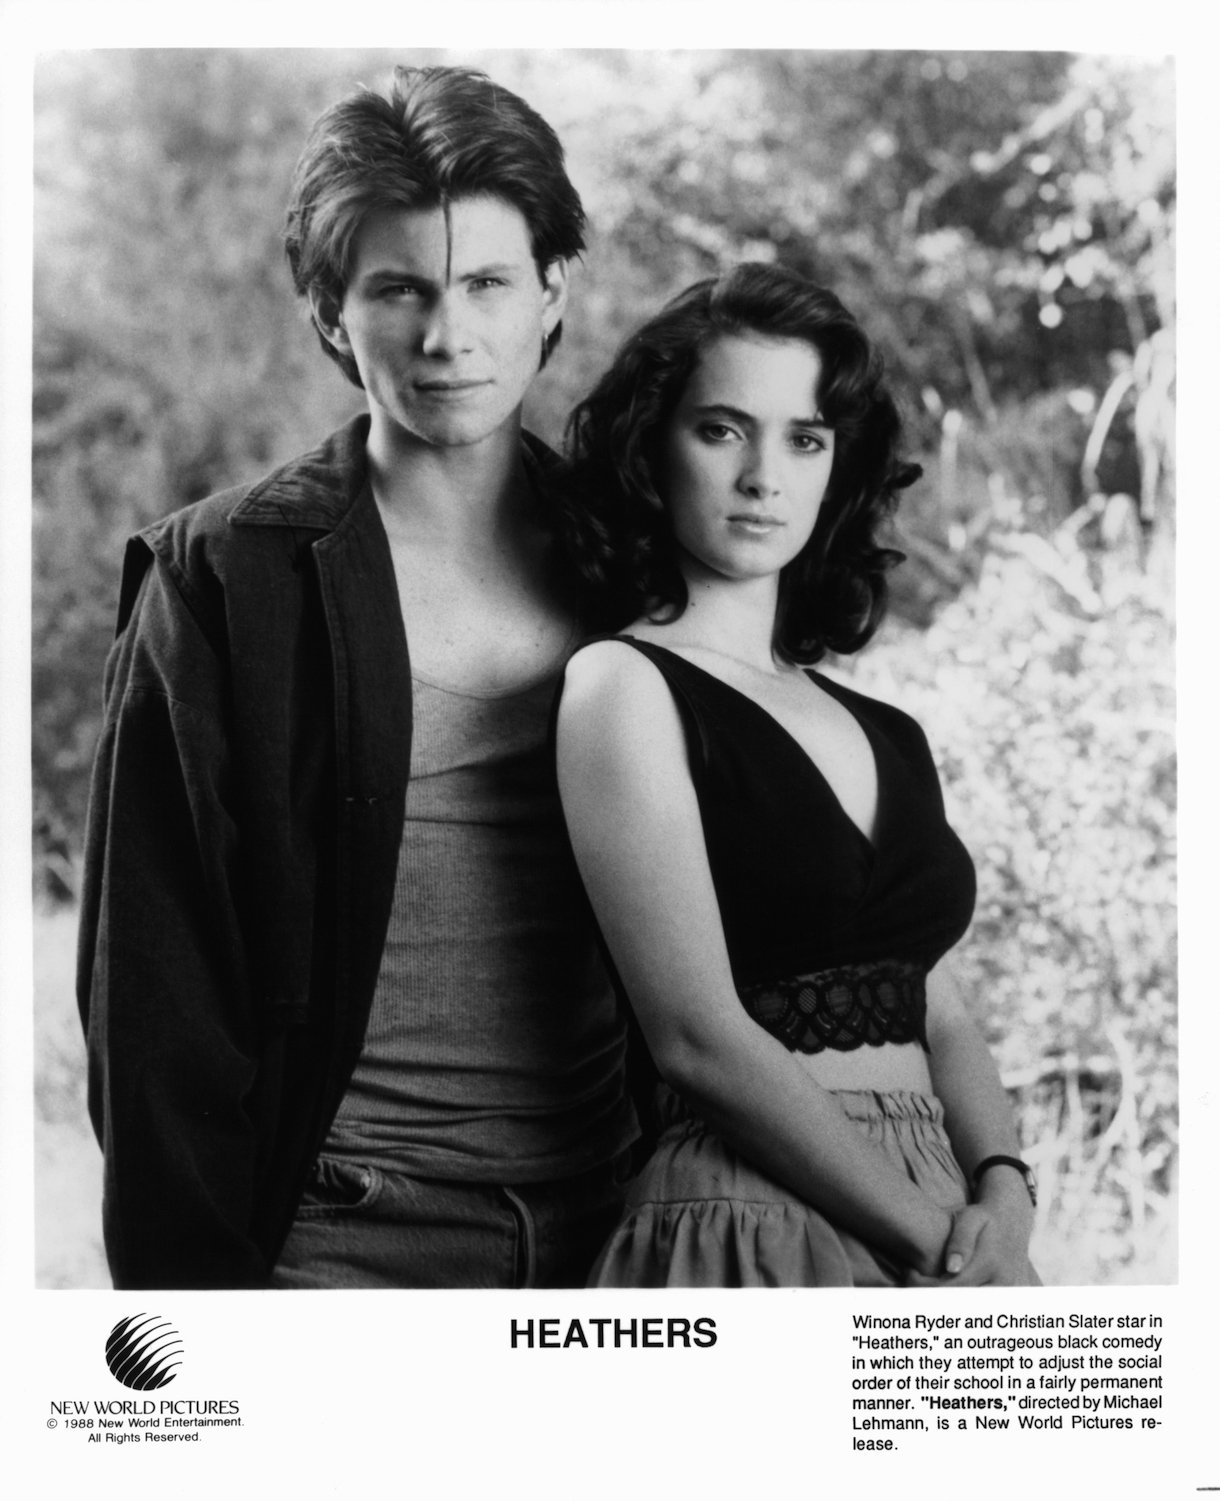 Christian Slater And Winona Ryder In 'Heathers'